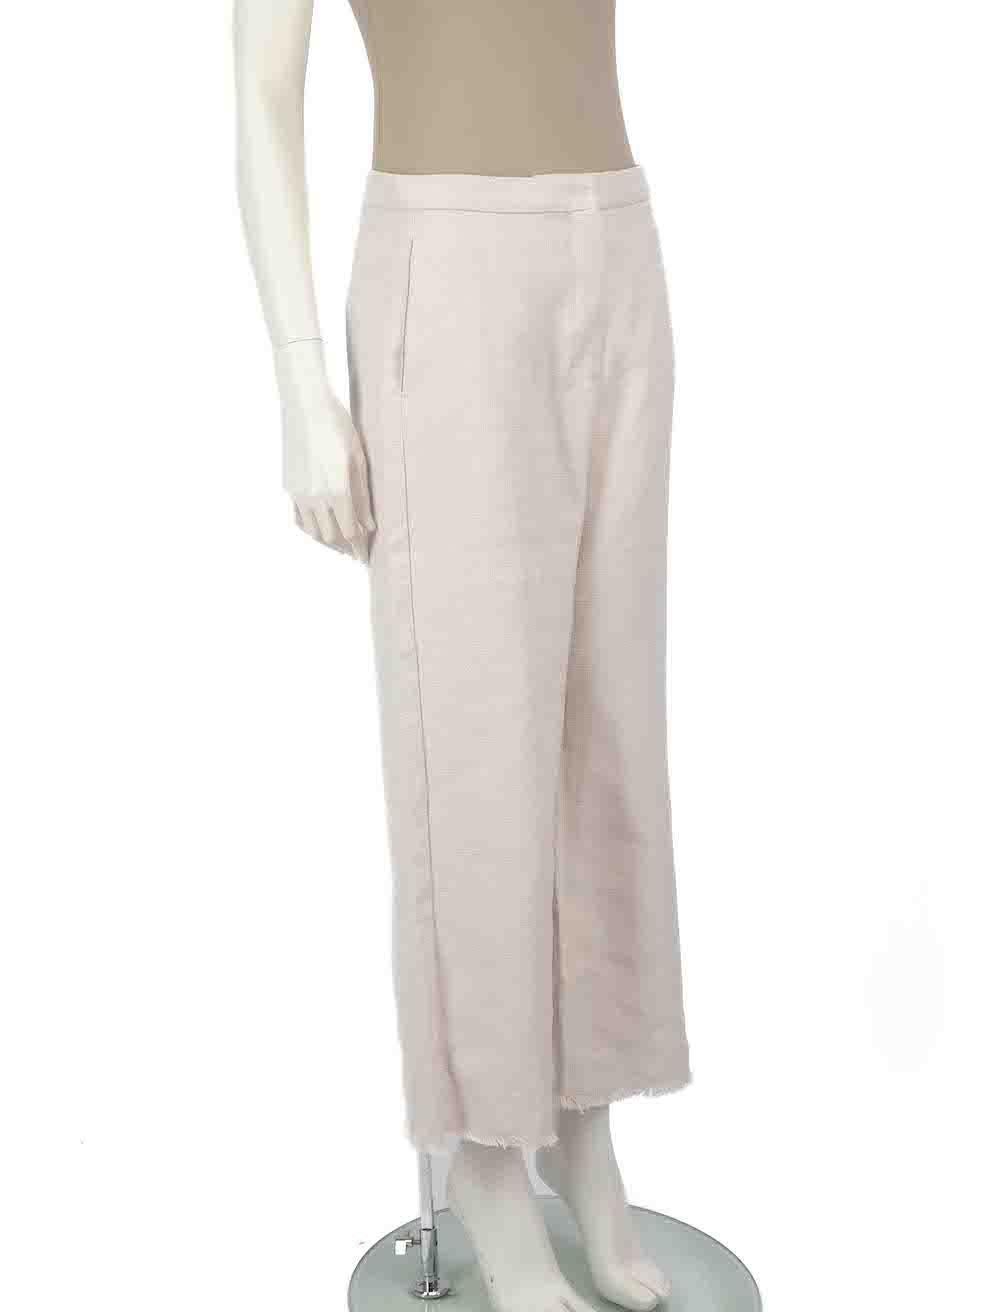 CONDITION is Very good. Hardly any visible wear to trousers is evident on this used S' Max Mara designer resale item.
 
 
 
 Details
 
 
 Ecru
 
 Cotton
 
 Trousers
 
 Straight leg
 
 Mid rise
 
 Raw hem
 
 2x Side pockets
 
 Fly zip, button and